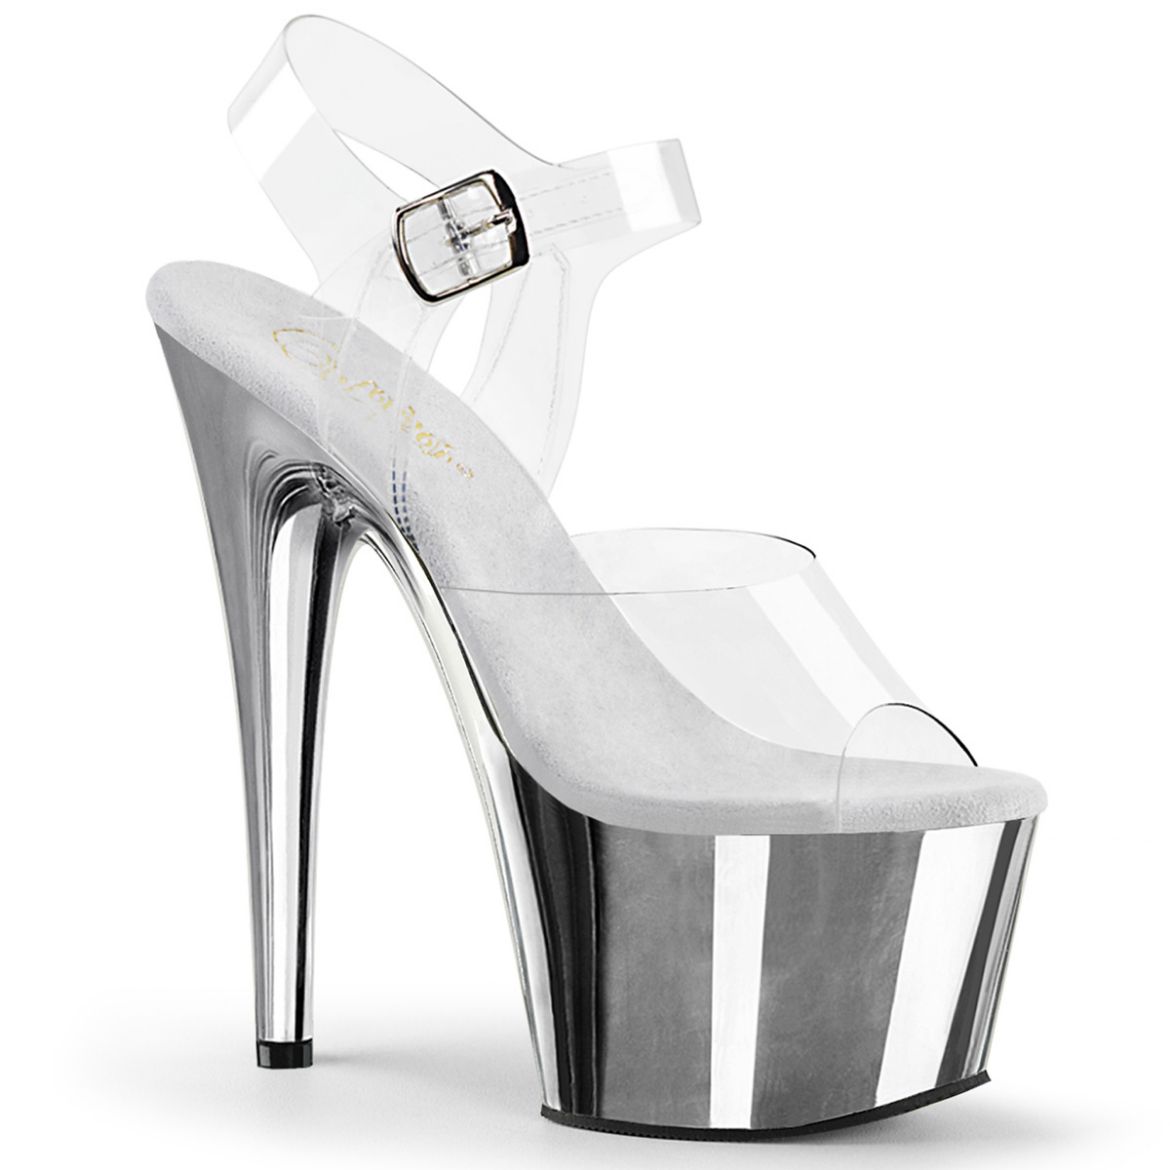 Product image of Pleaser ADORE-708 Clr-Matching/Slv Chrome 7 Inch Heel 2 3/4 Inch PF Ankle Strap Sandal w/ Chrome Plated Btm